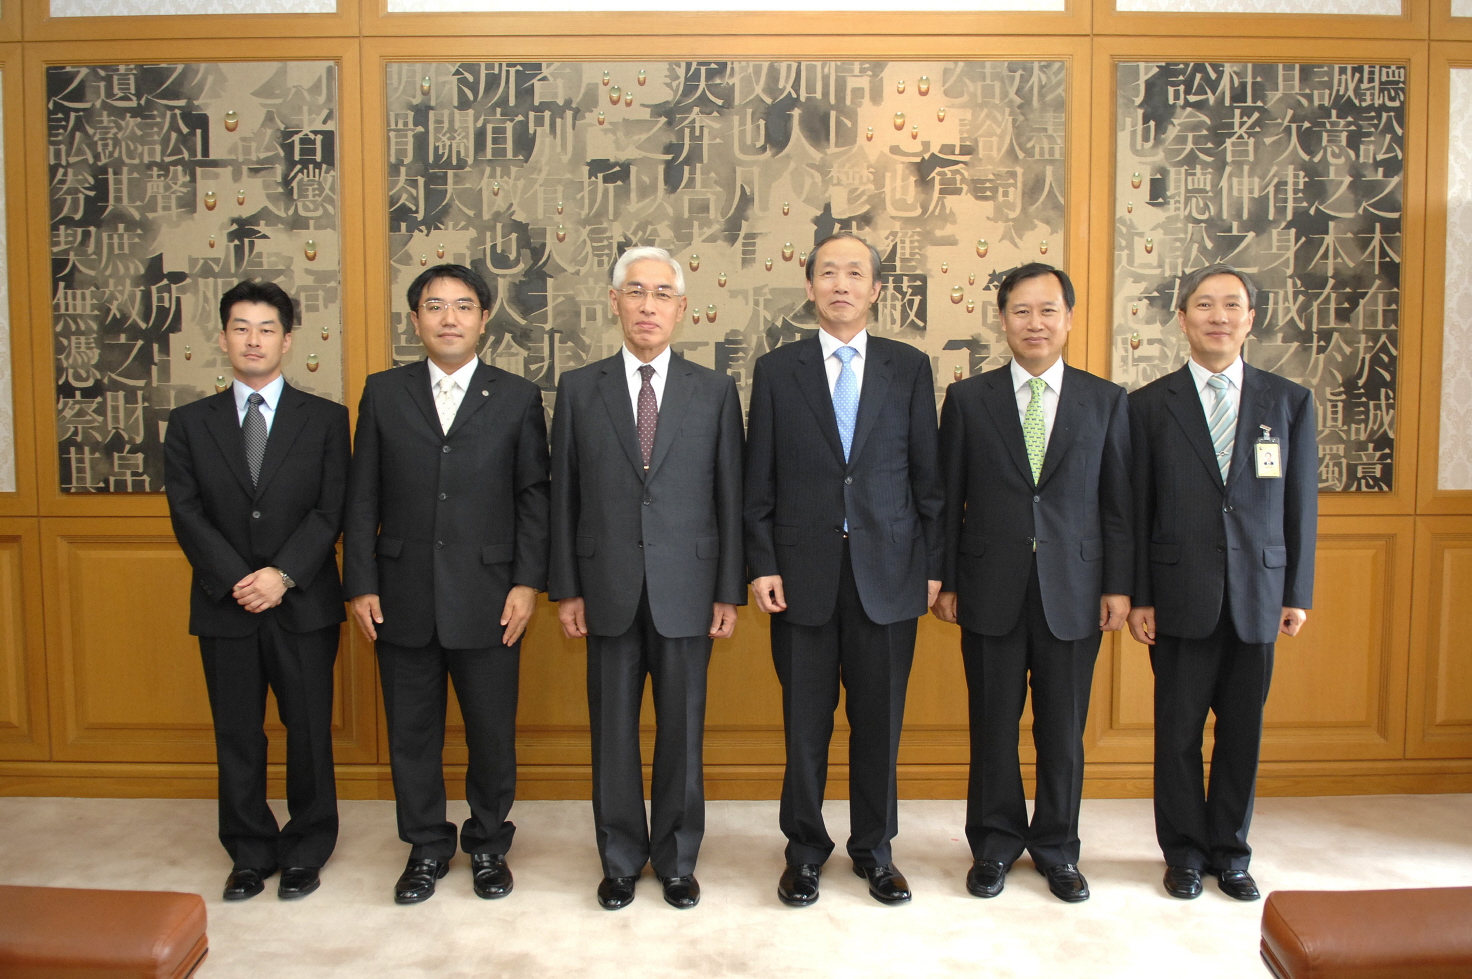 [09_04_08]Justice IMAI Isao of Japan pays a courtesy call on the Chief Justice